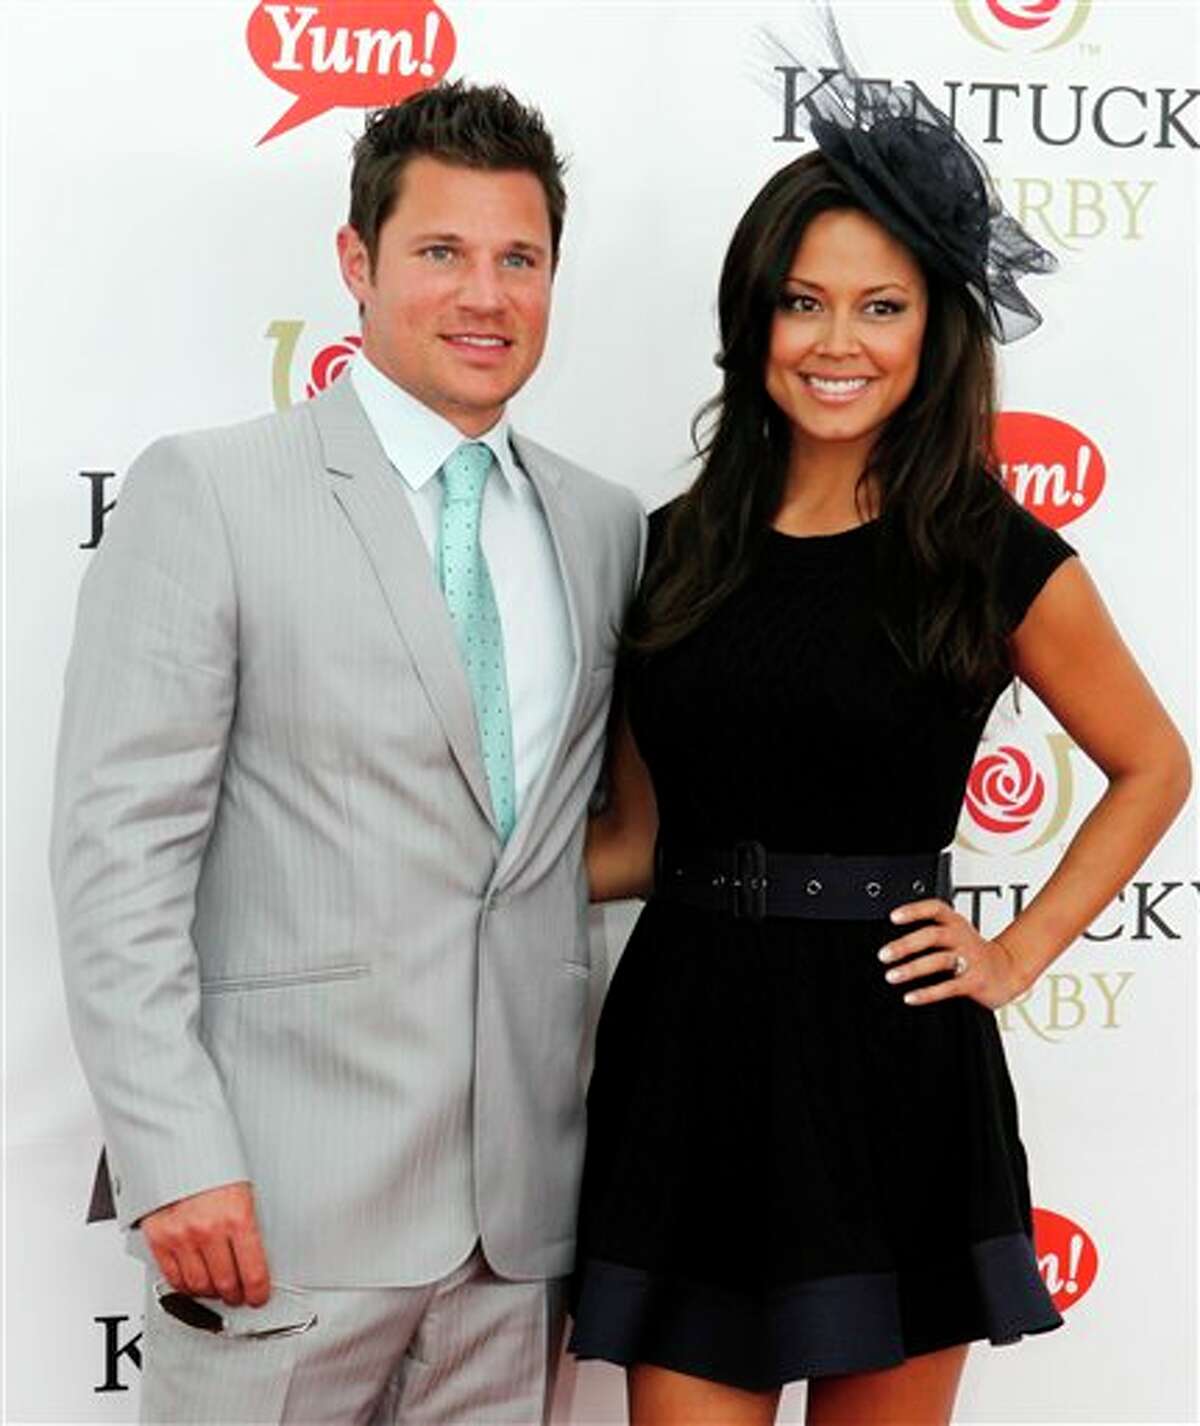 Nick Lachey and fiancee Vanessa Minnillo arrive for the 137th Kentucky Derby horse race at Churchill Downs on Saturday. DARRON CUMMINGS/ASSOCIATED PRESS